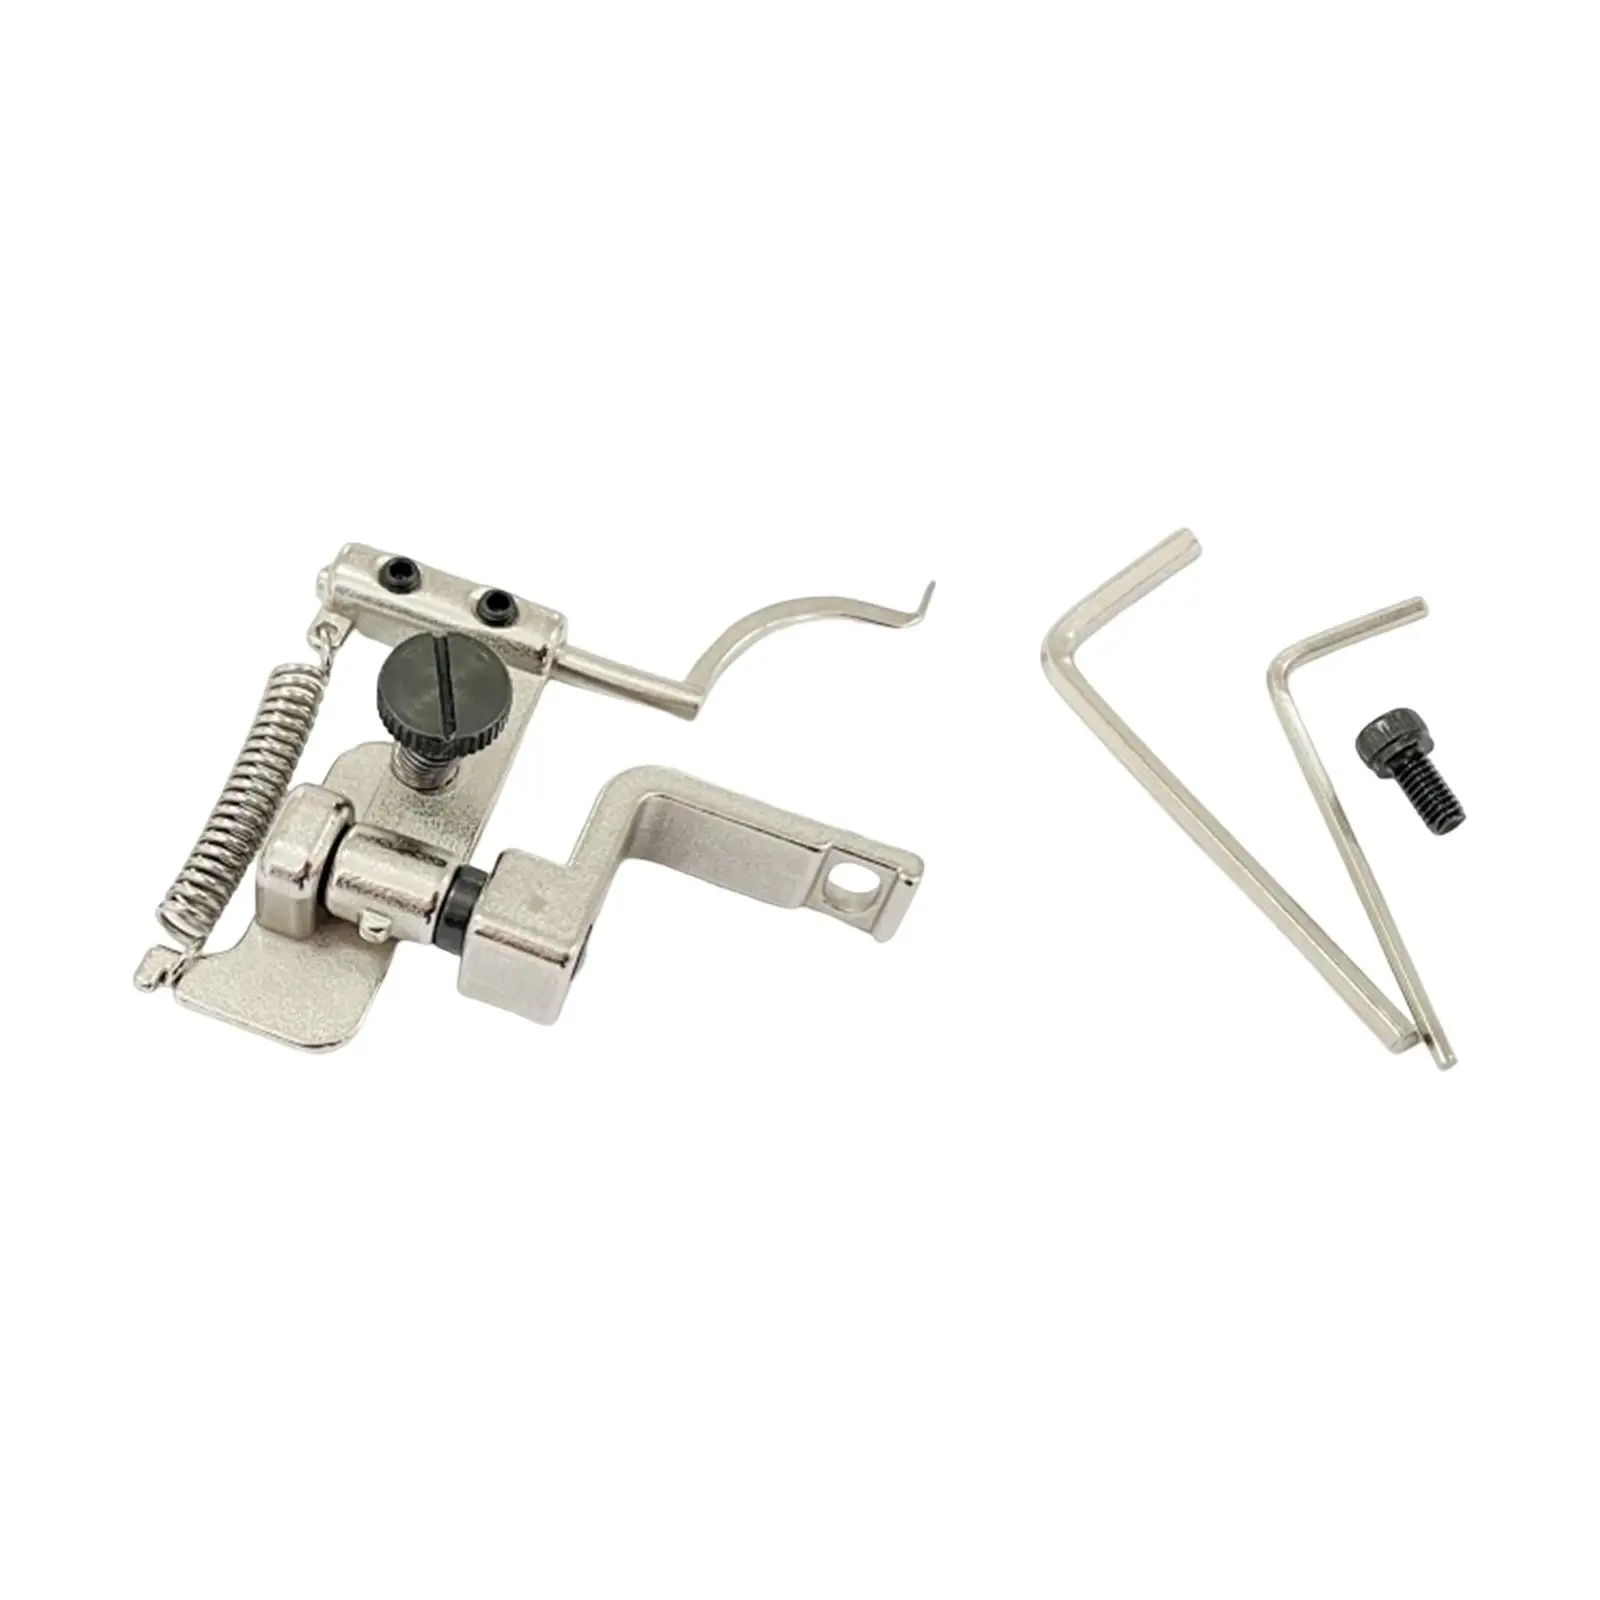 Suspended Edge Guide Universal Edge Guide with Mounting Screws for Professionals